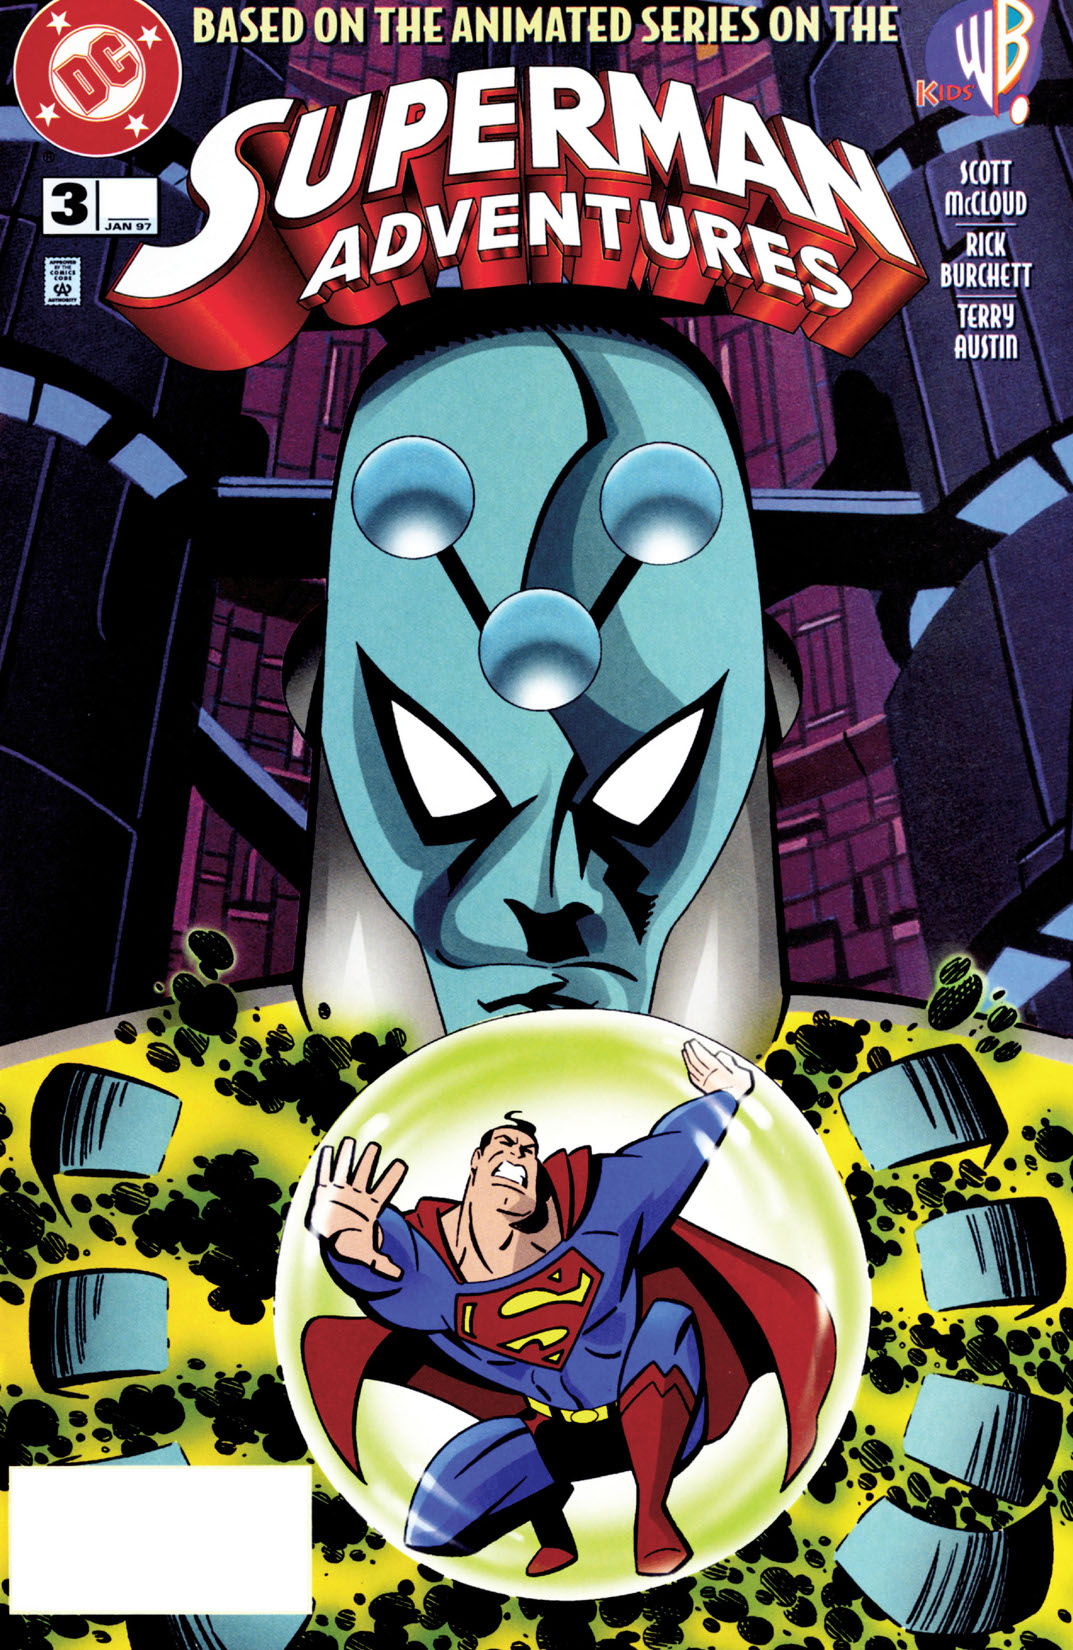 Superman Adventures #3 preview images